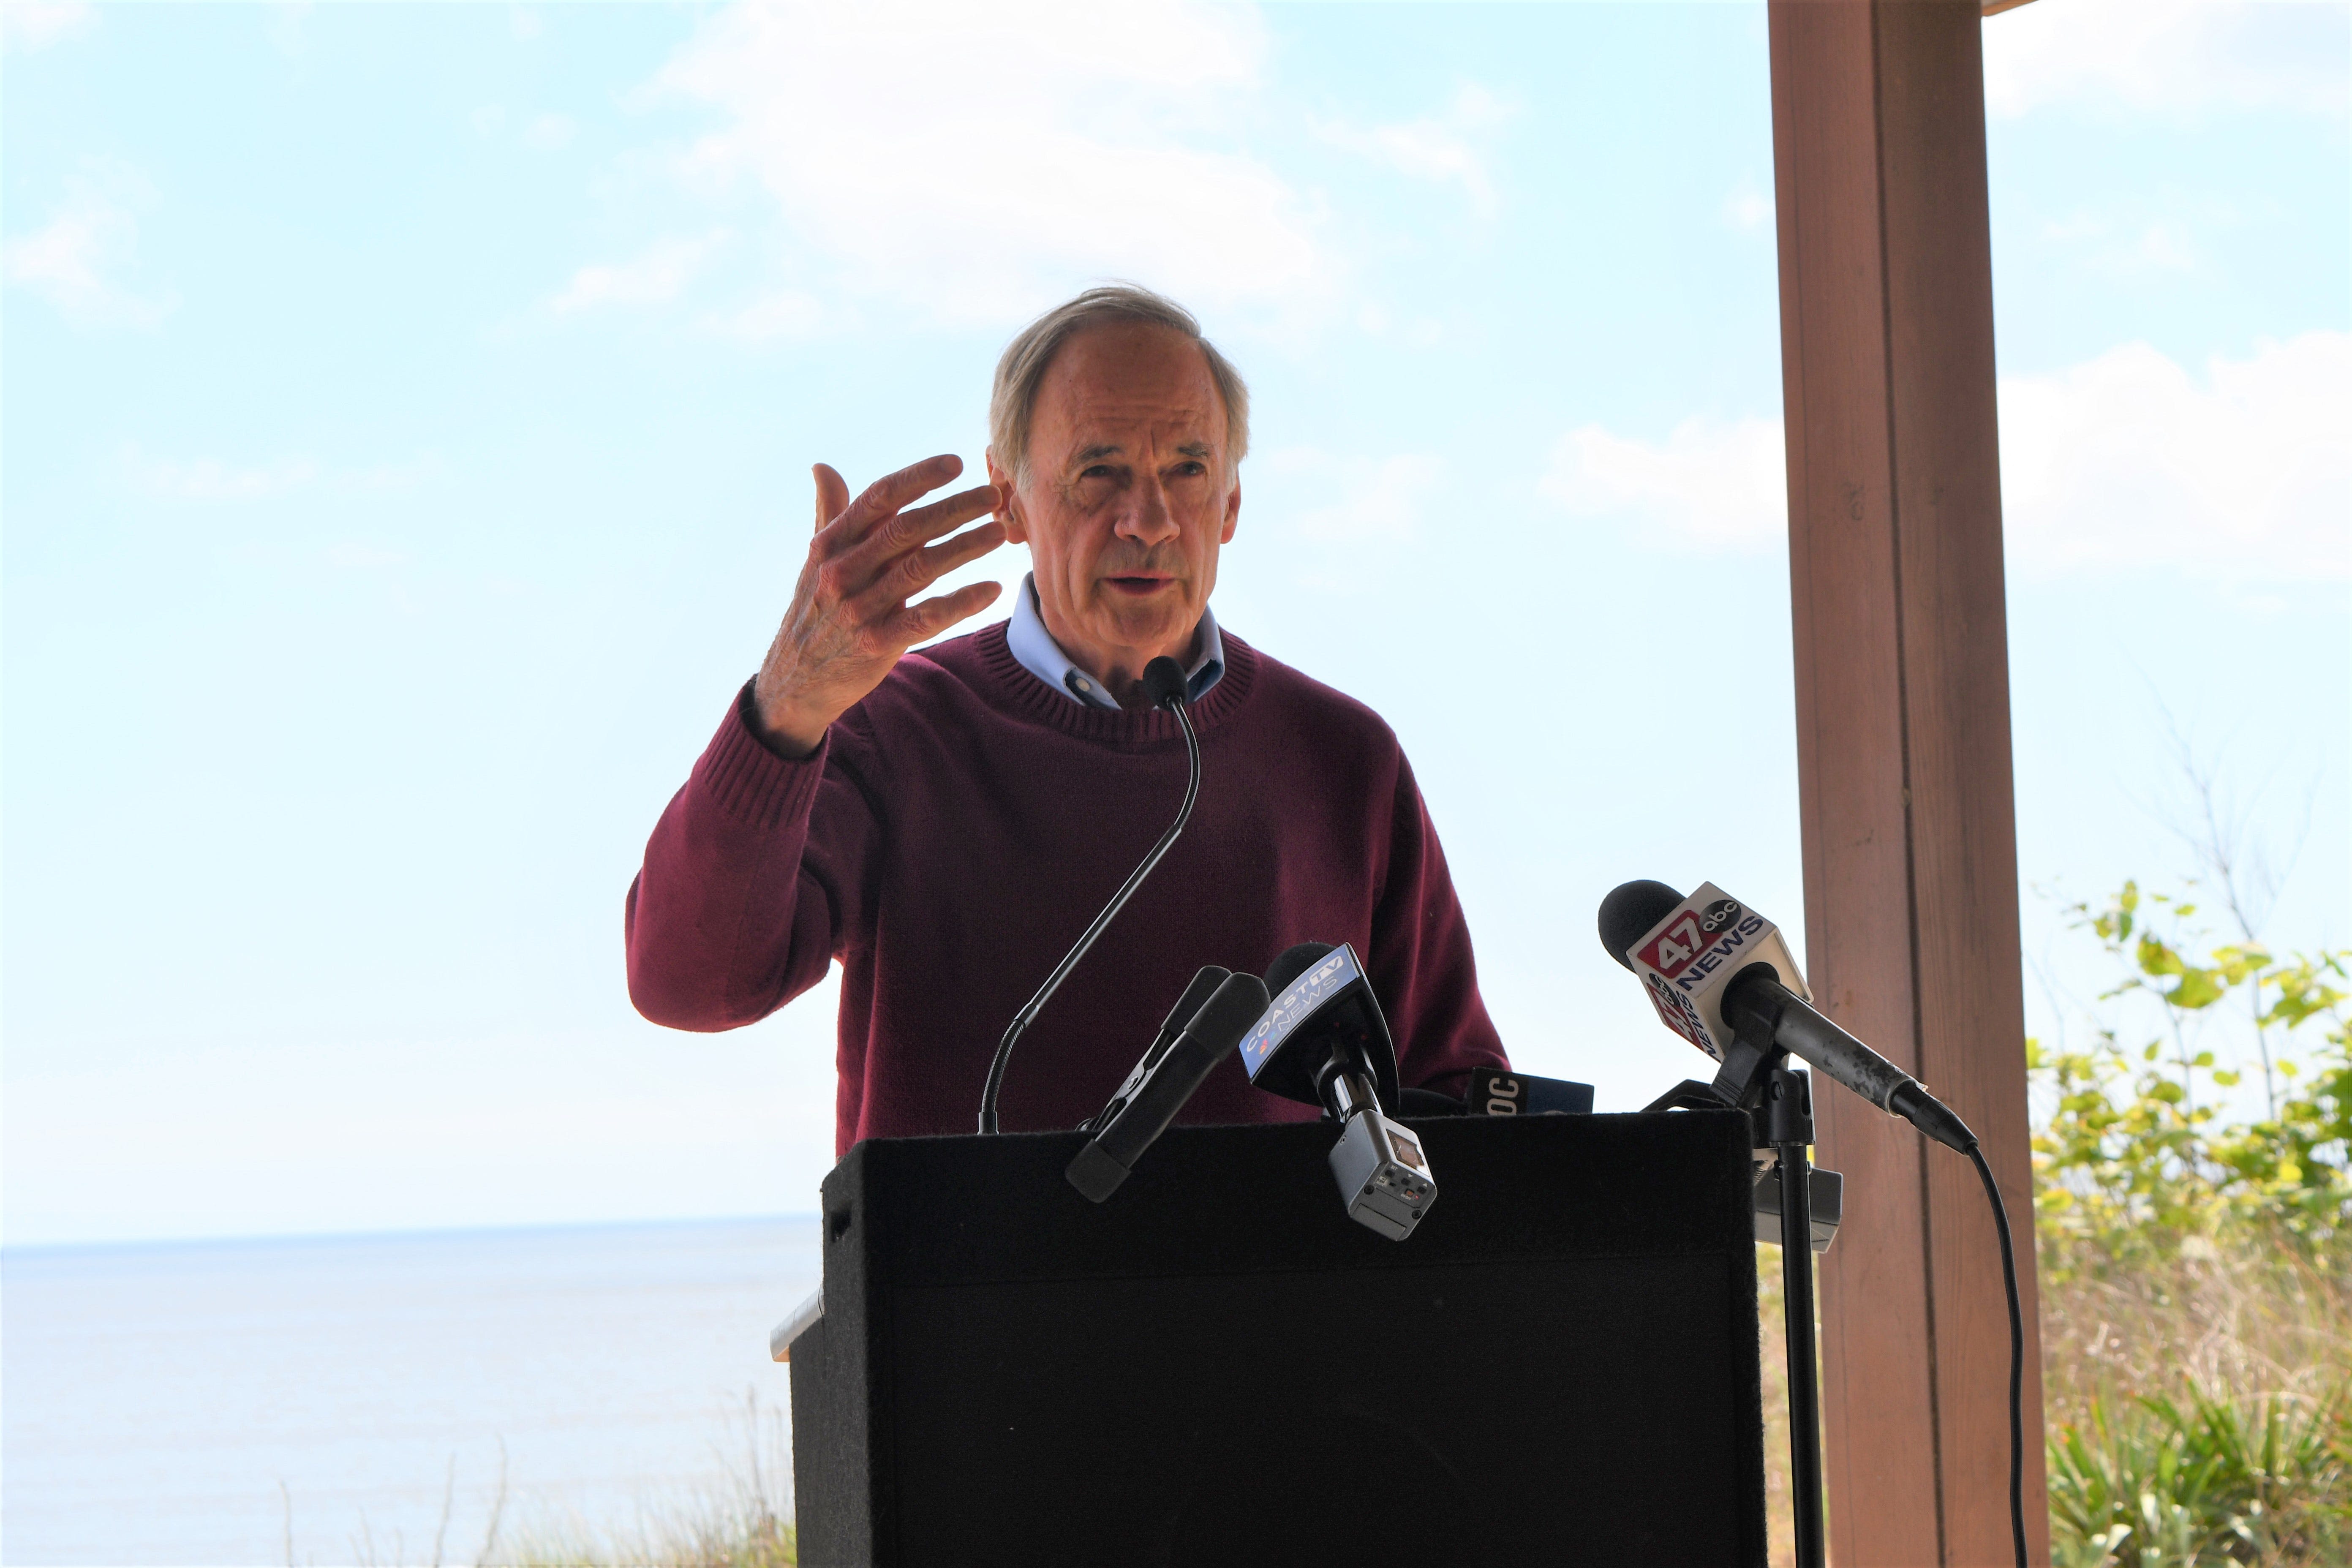 Delaware's bay beaches to be replenished with nearly $60 million in federal funds